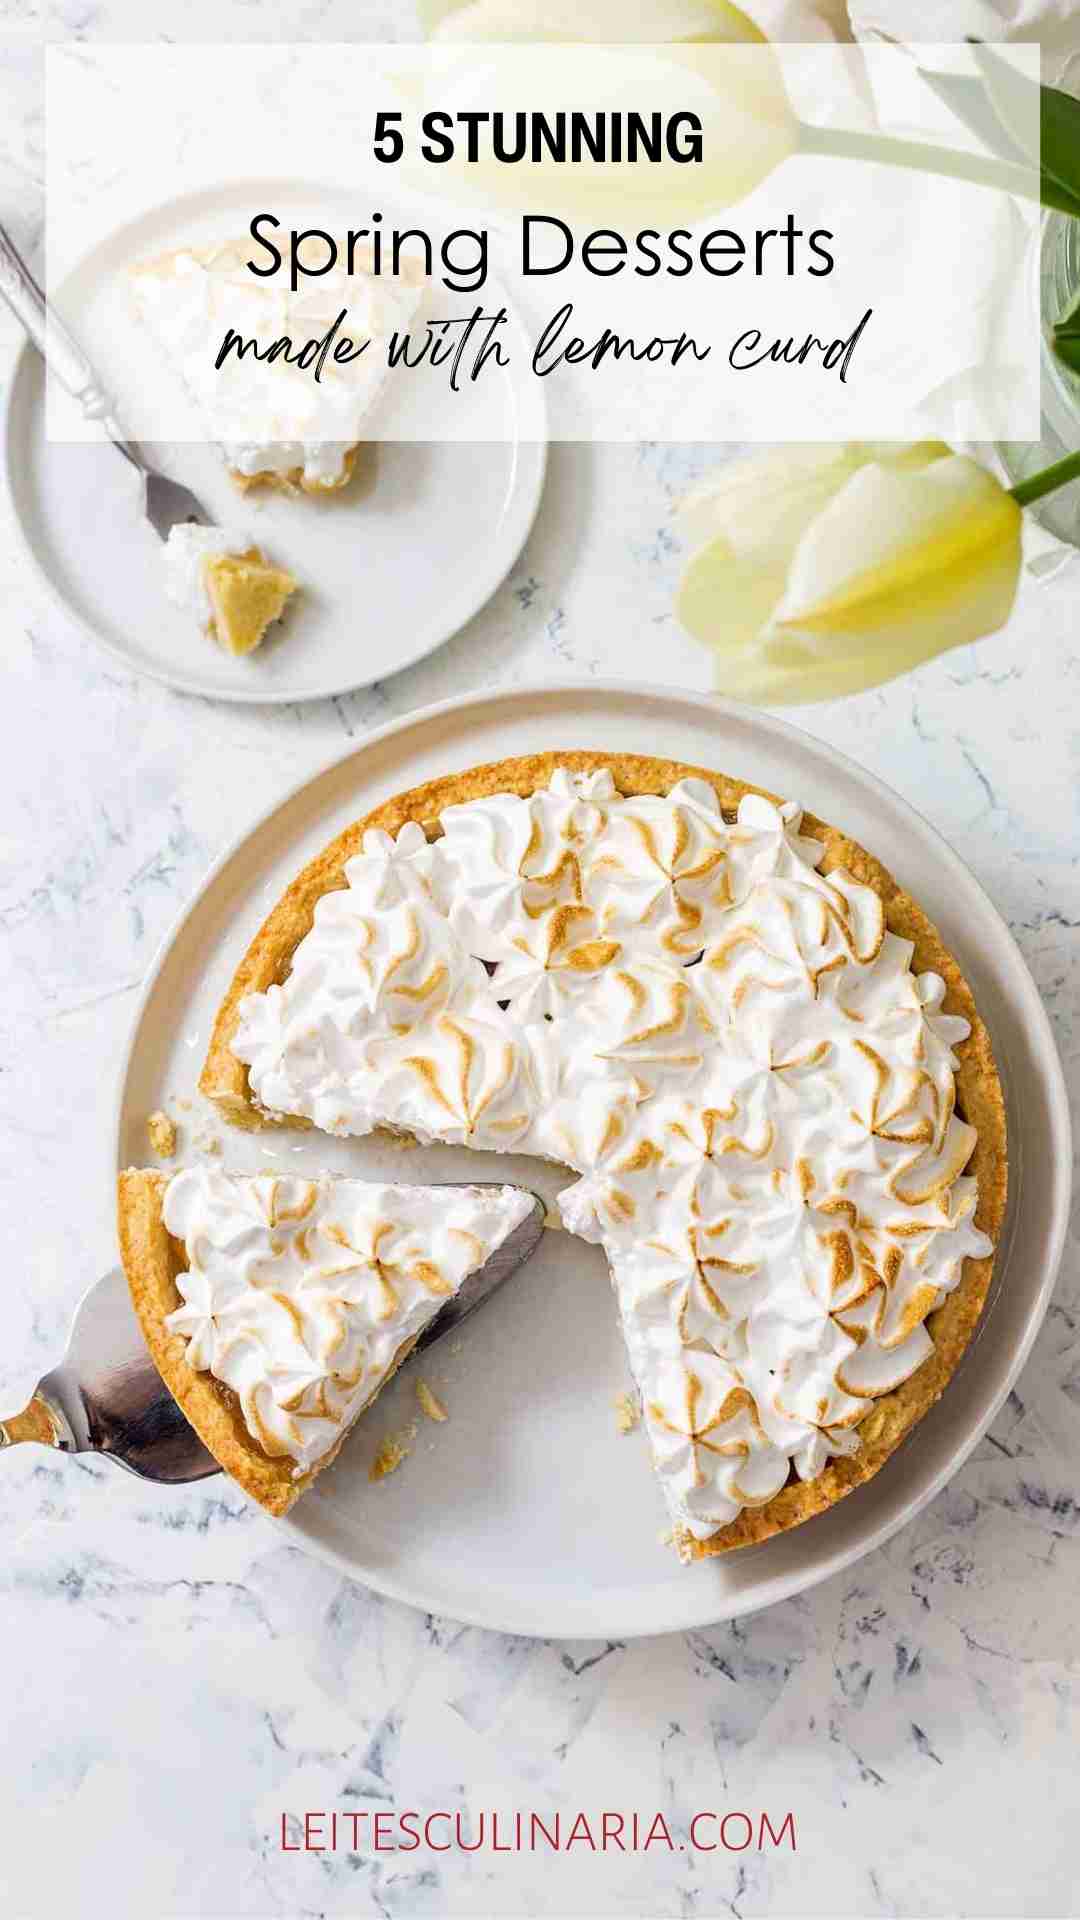 A lemon meringue tart with a slice cut from it on a separate plate.